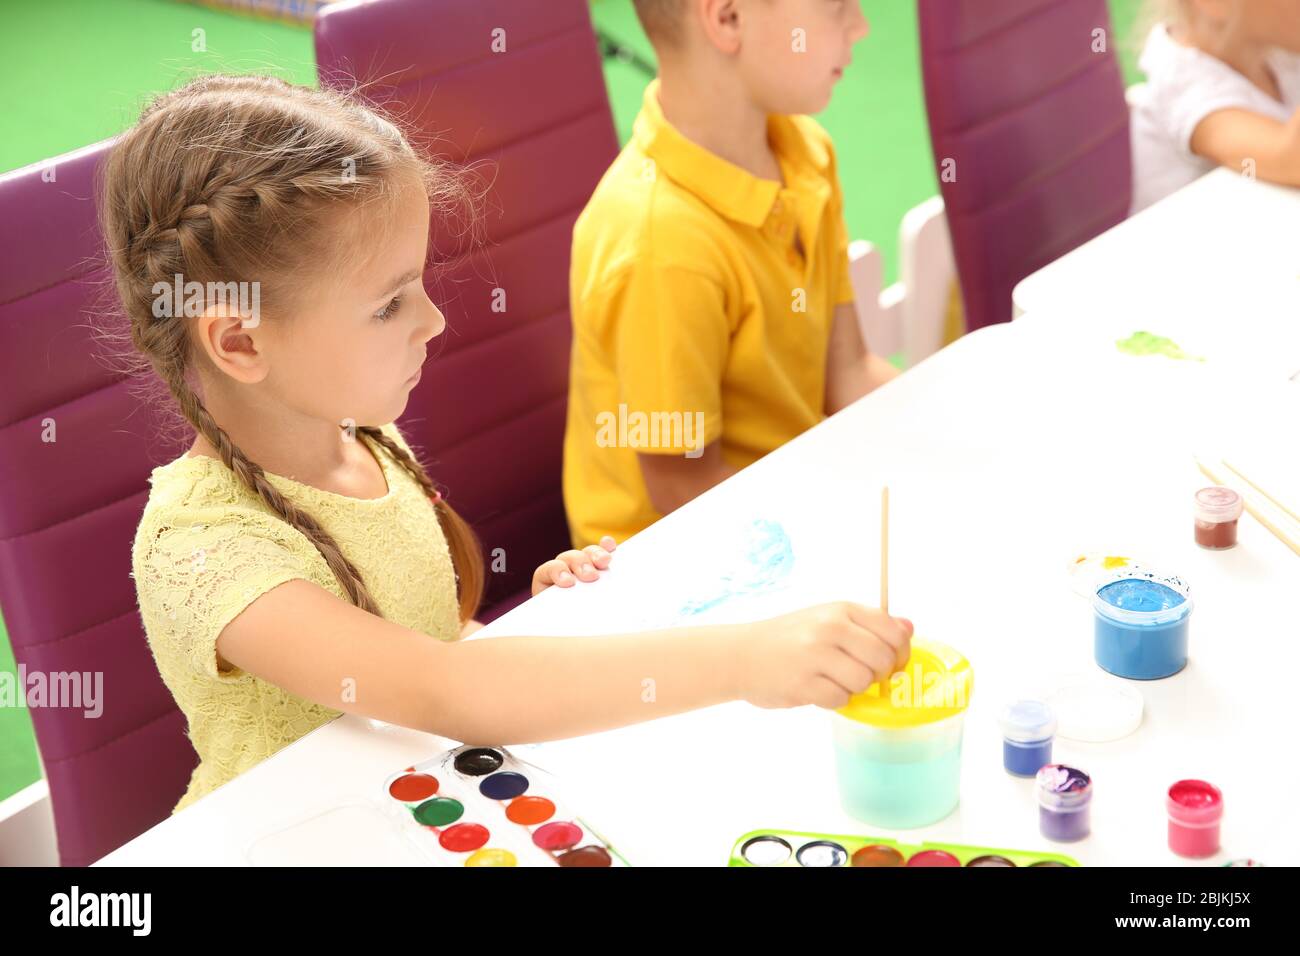 Little children at painting lesson in classroom Stock Photo